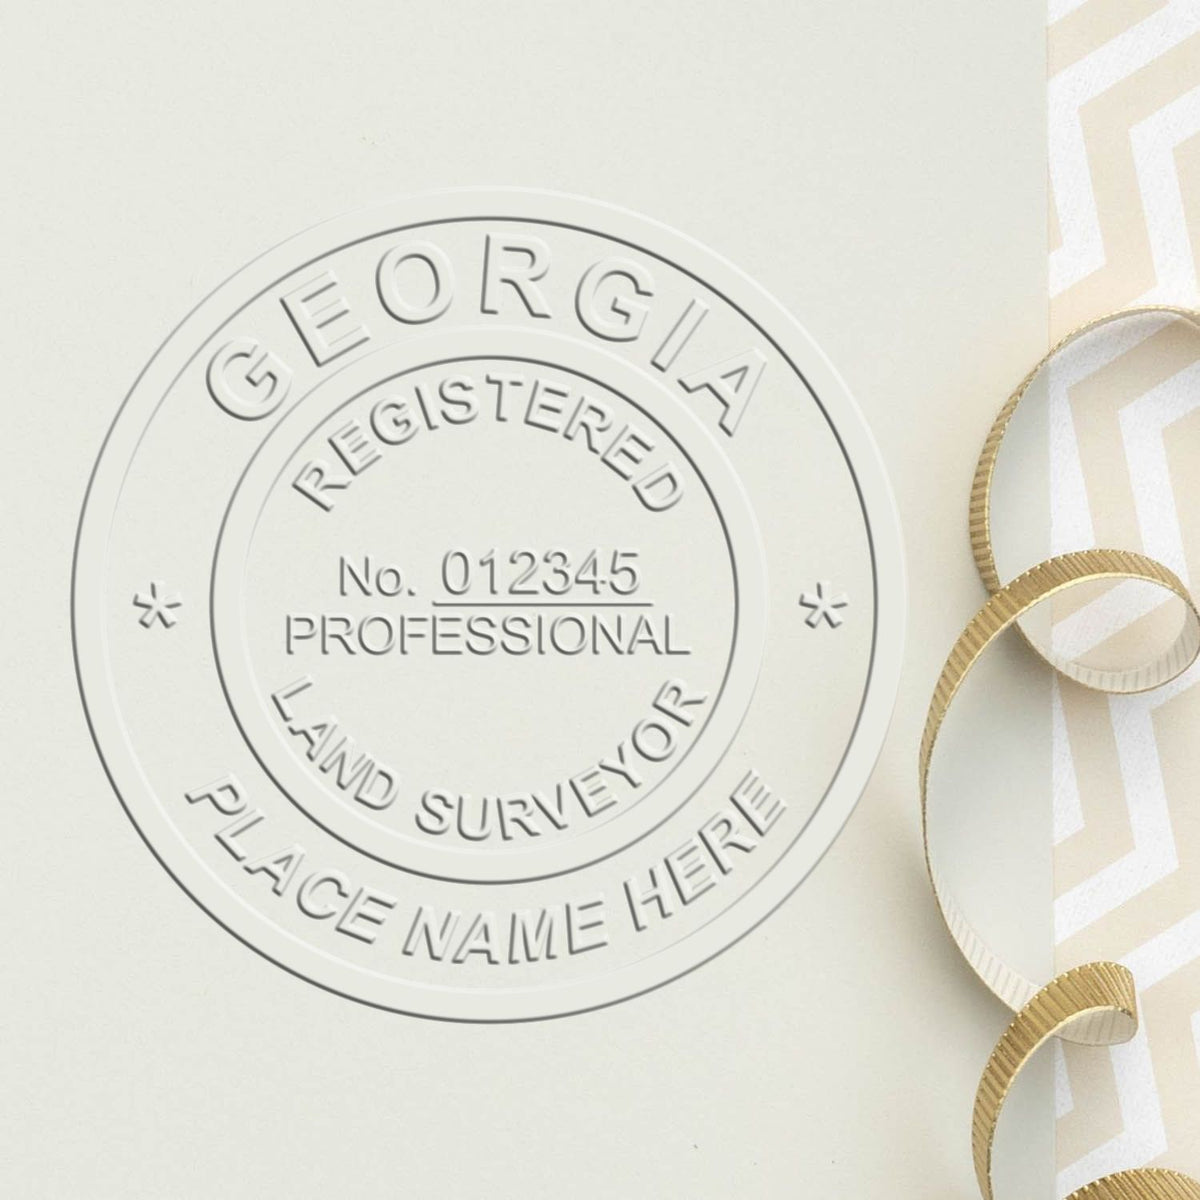 A lifestyle photo showing a stamped image of the Handheld Georgia Land Surveyor Seal on a piece of paper